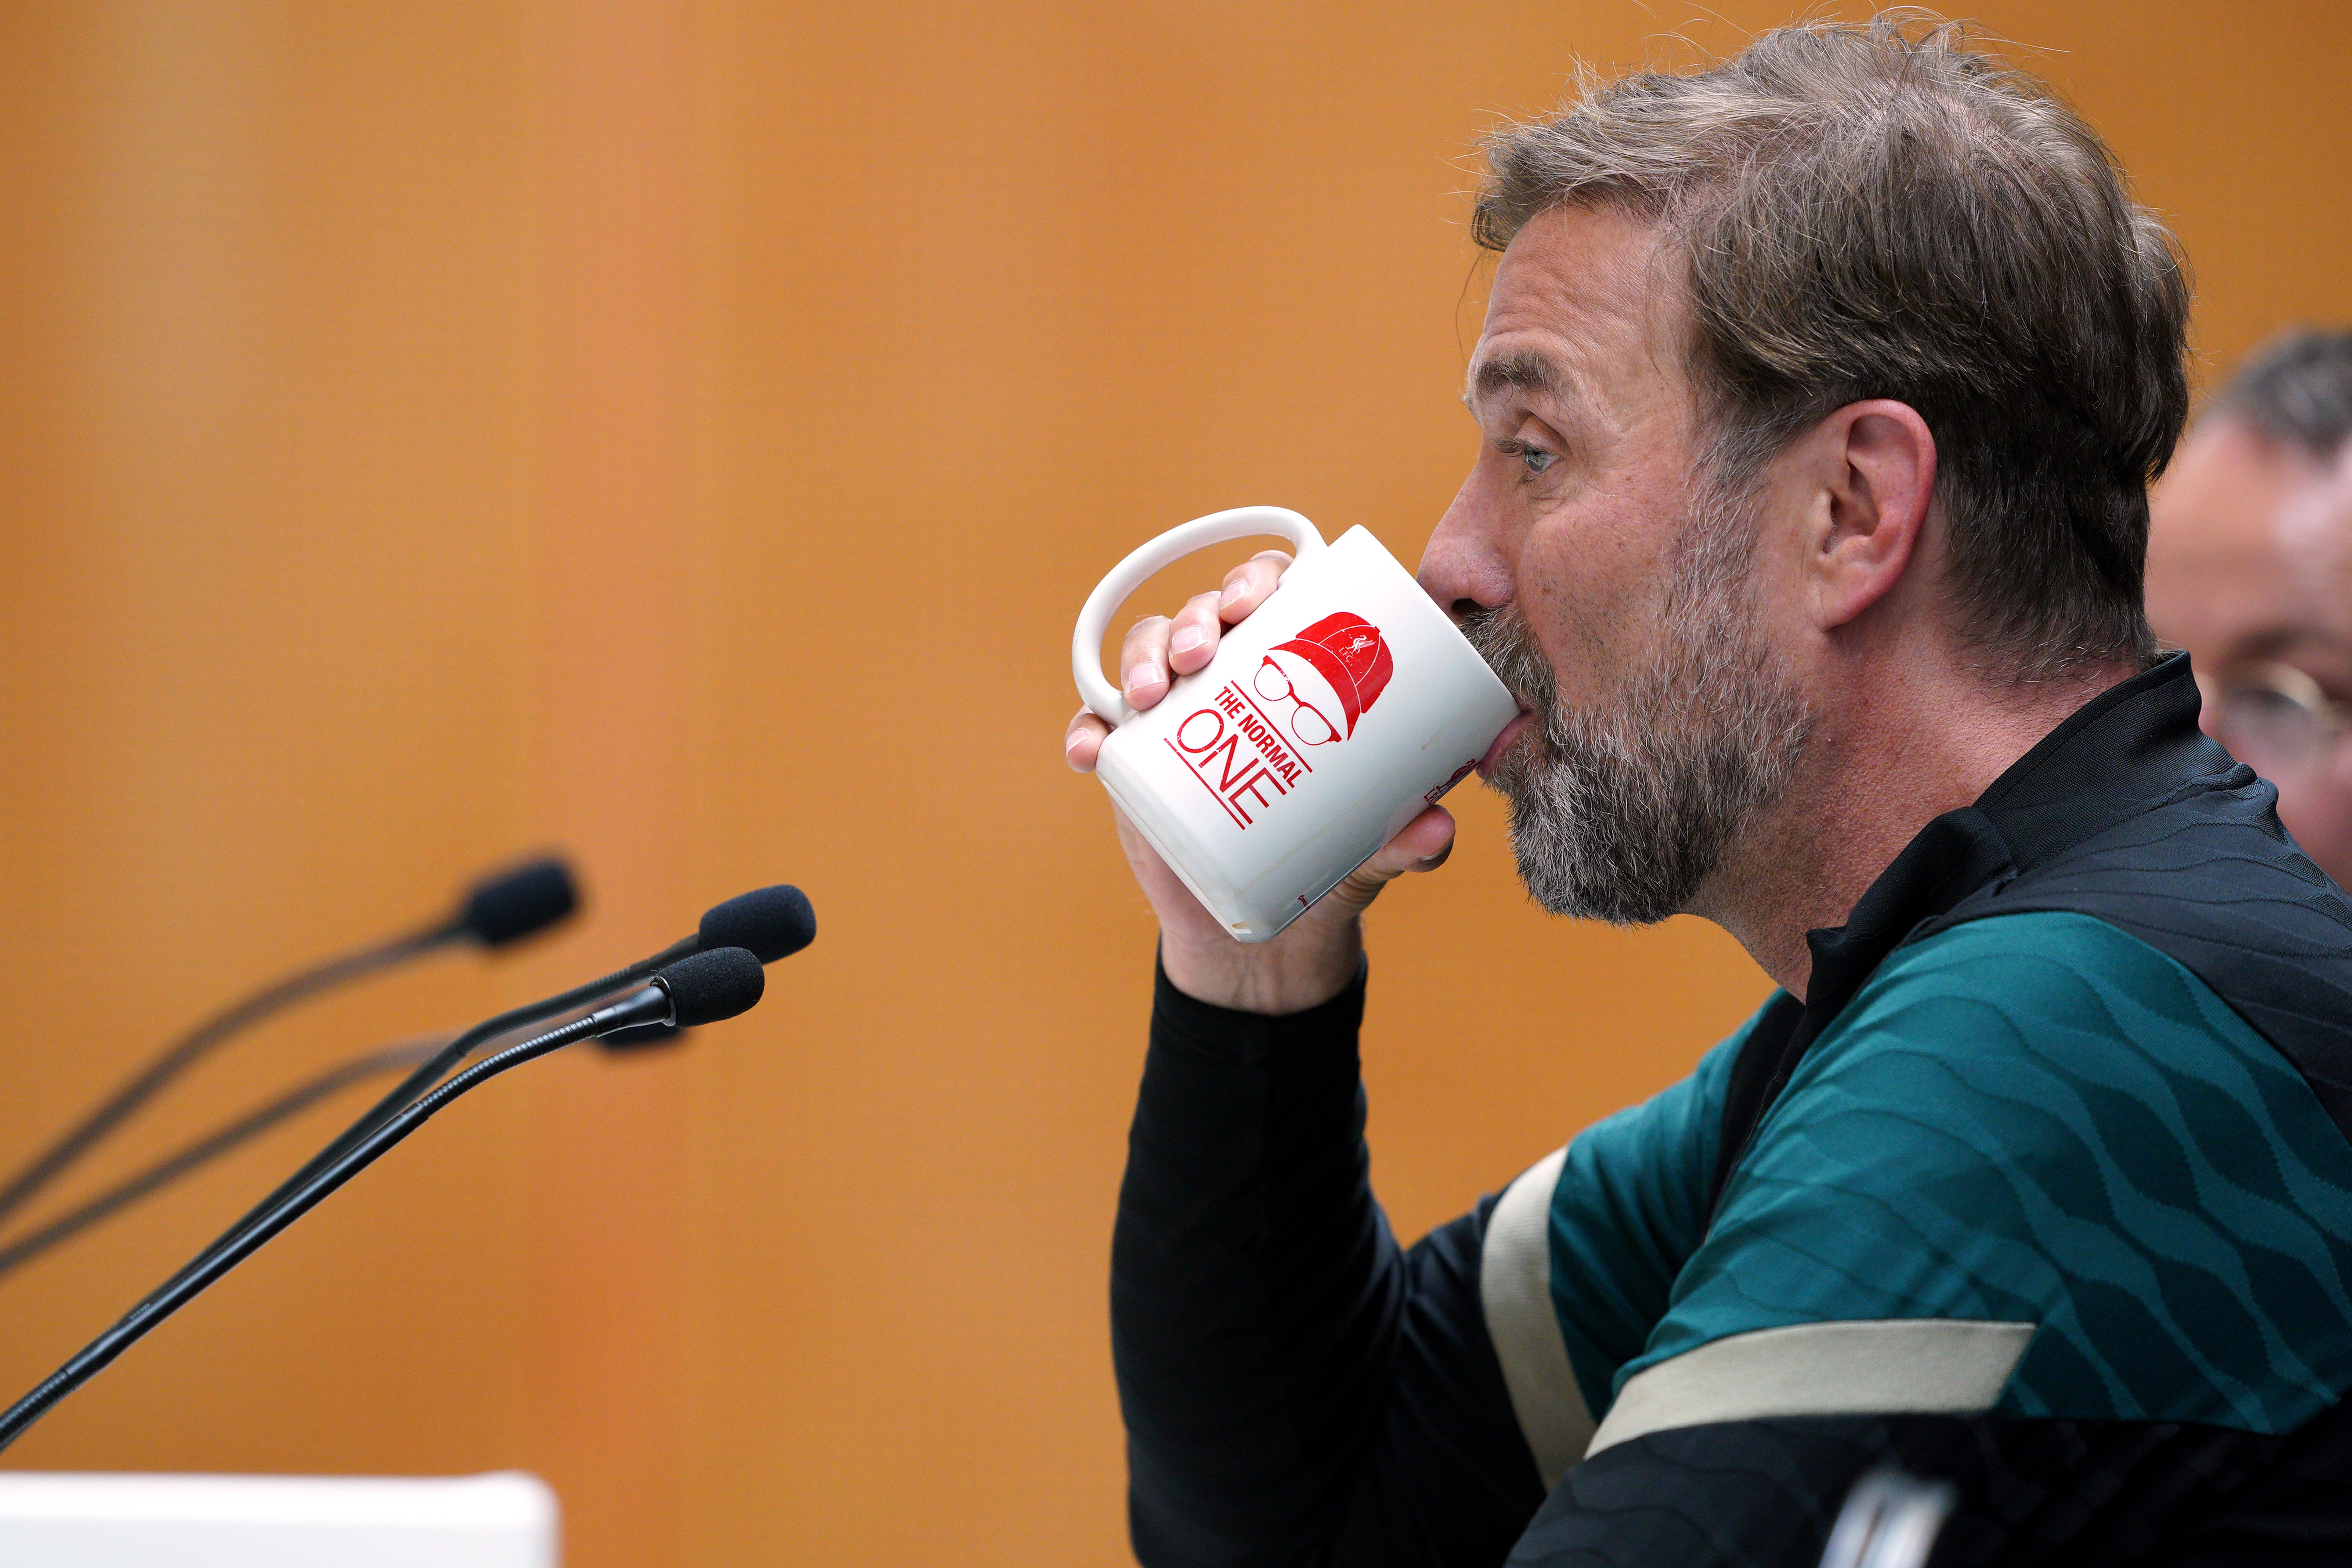 Liverpool manager Jurgen Klopp using a mug with The Normal One on it during a press conference as part of a media day at the AXA Training Centre in Liverpool ahead of the UEFA Champions League Final in Paris on Saturday. Picture date: Wednesday May 25, 2022.